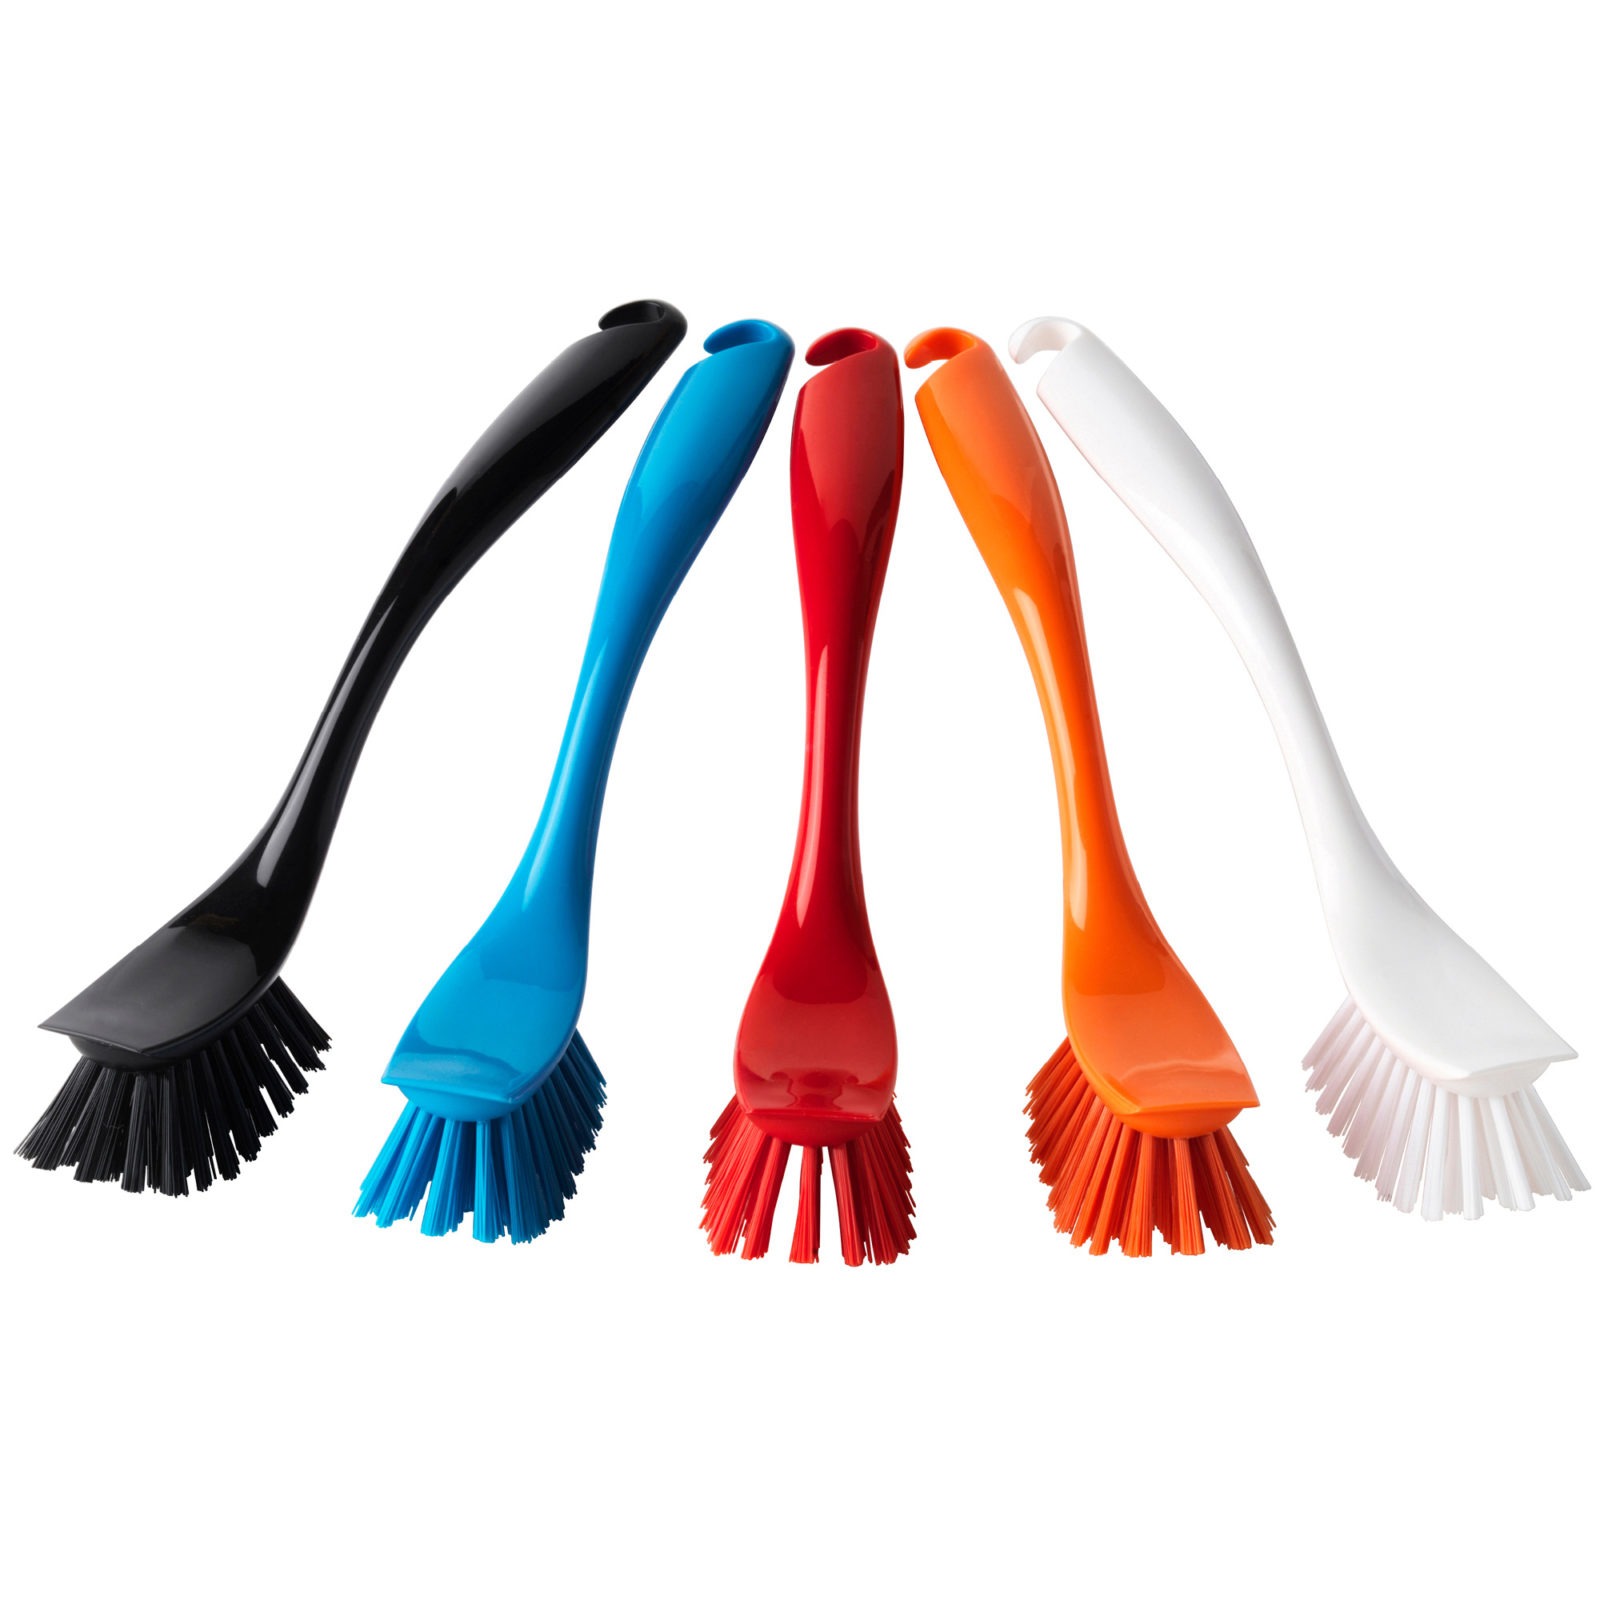 Five washing-up brushes in different colours: black, blue, red, orange and white.